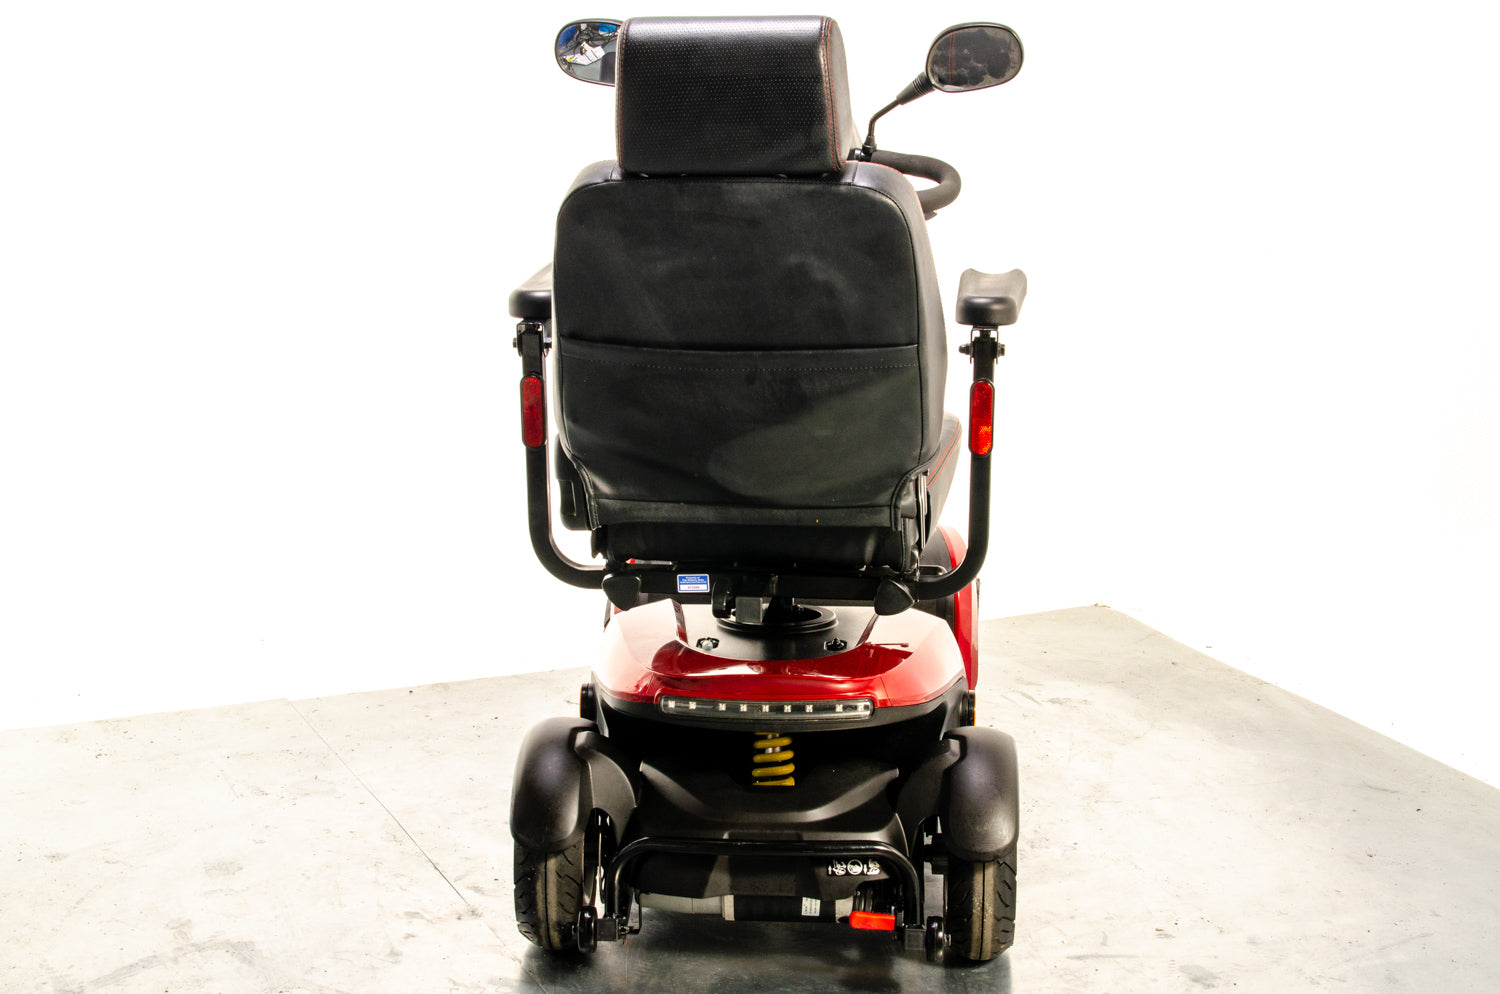 Kymco Komfy 4 Used Mobility Scooter Pavement Suspension Pneumatic Tyres Comfort 4mph Red